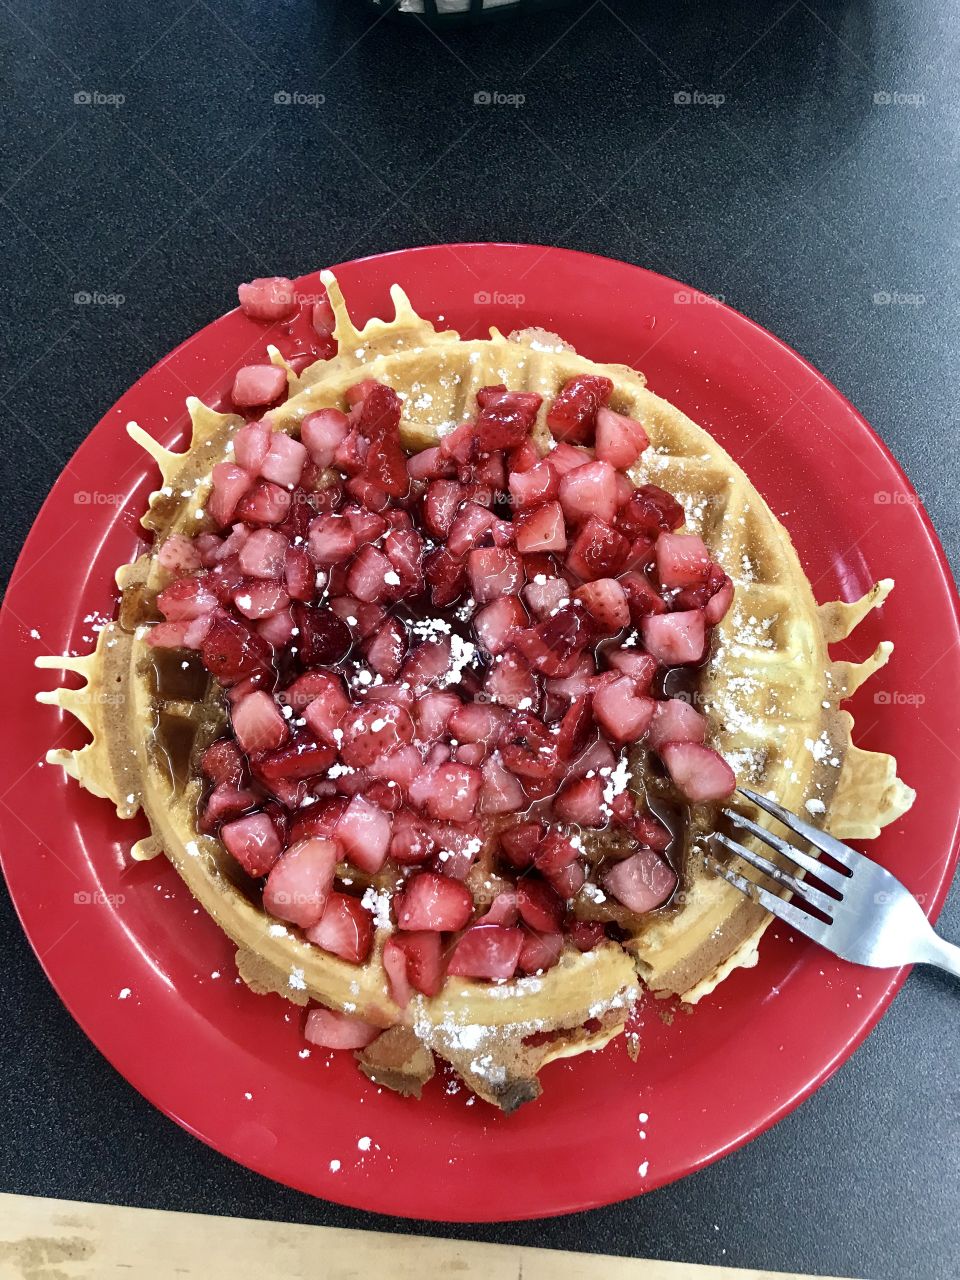 Colorful image of a large golden brown waffle covered in powdered sugar and strawberry toppings